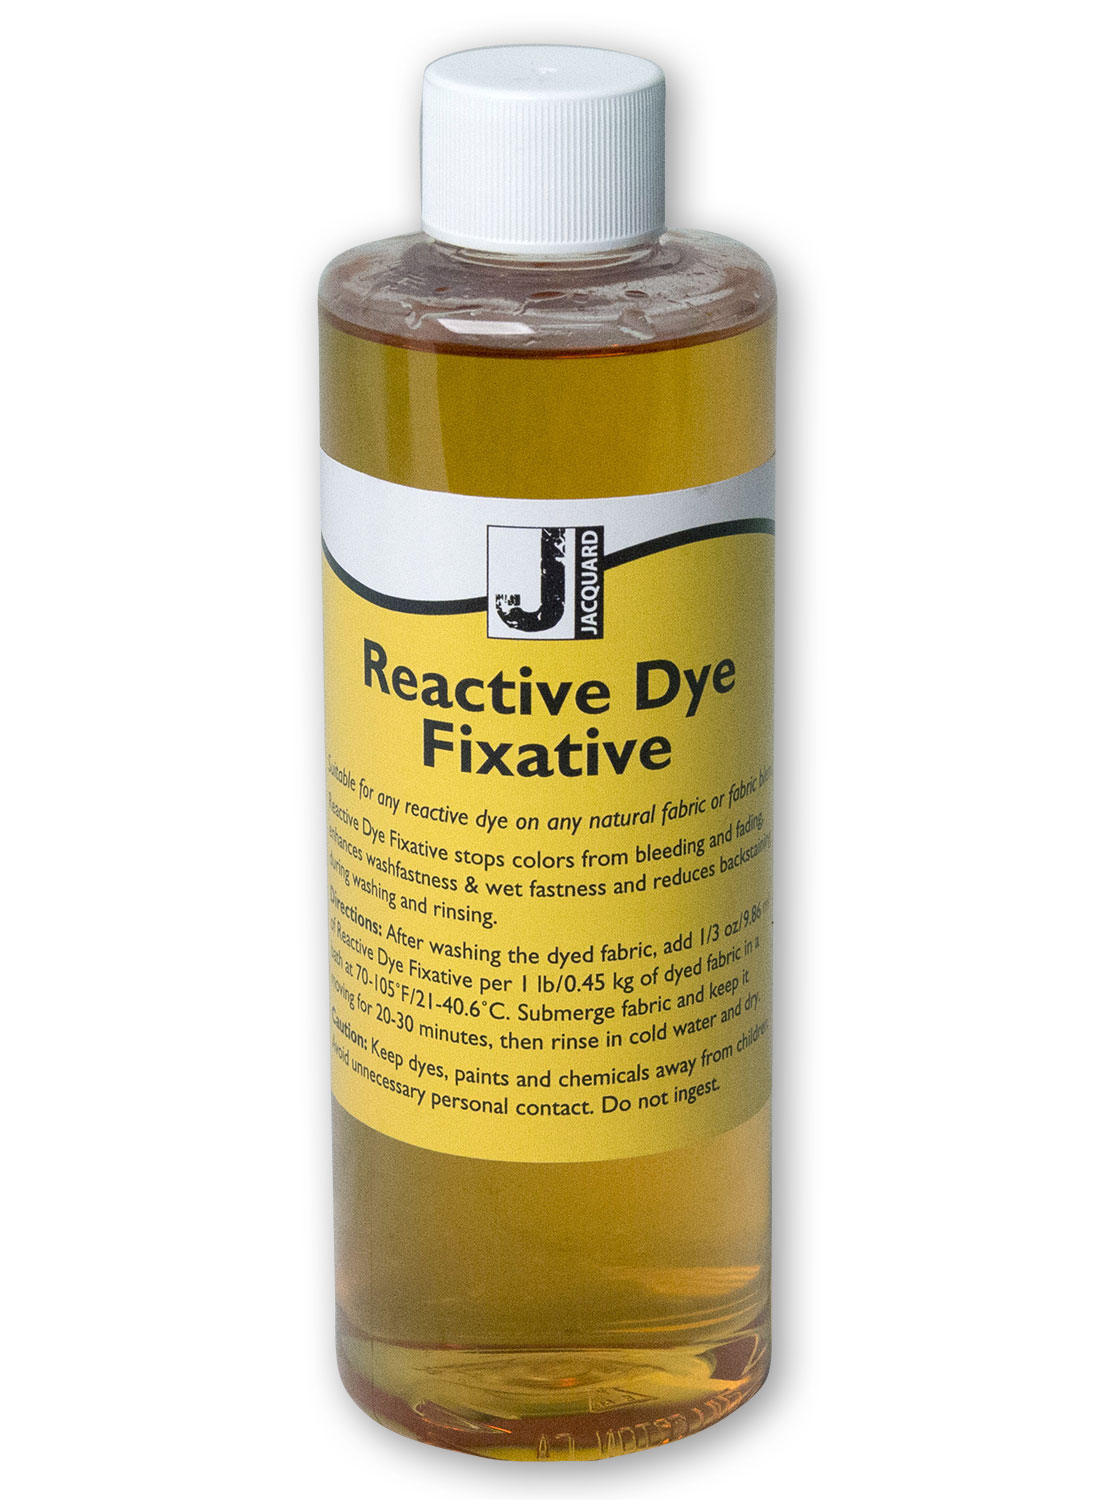 Jacquard Products — Jacquard Products - Chemicals - Reactive Dye Fixative